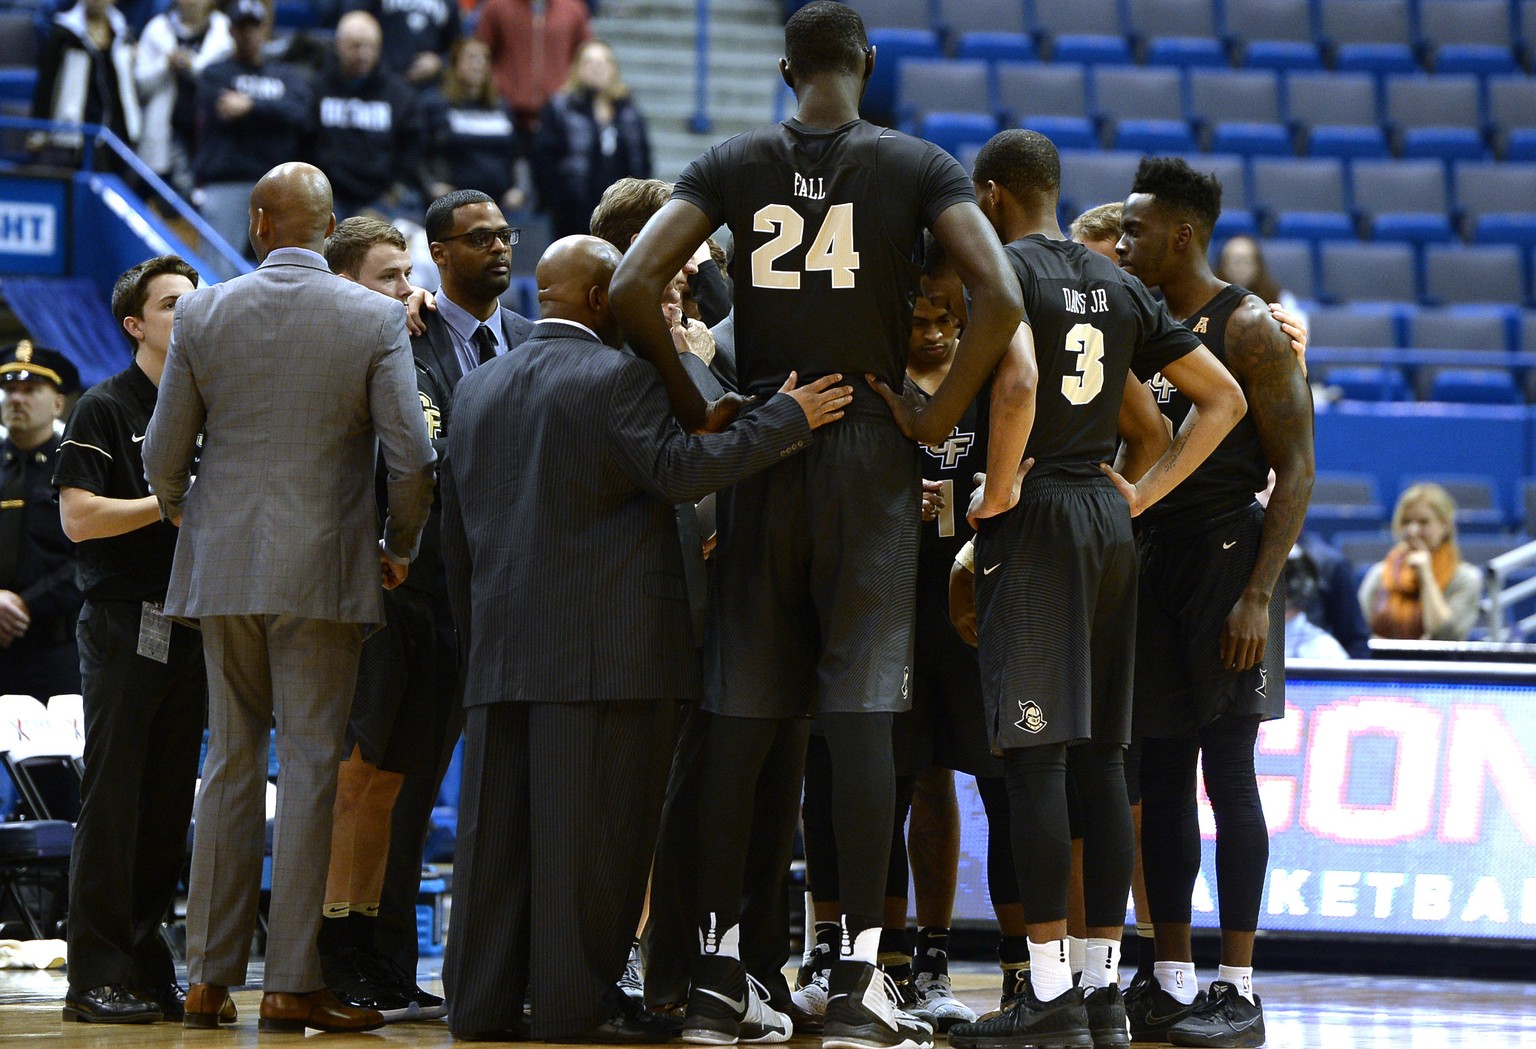 FILE - In this Jan. 8, 2017, file photo, Central Florida&#039;s Tacko Fall (24) stands above his team in a huddle during the first half of an NCAA college basketball game, in Hartford, Conn. The talle ...